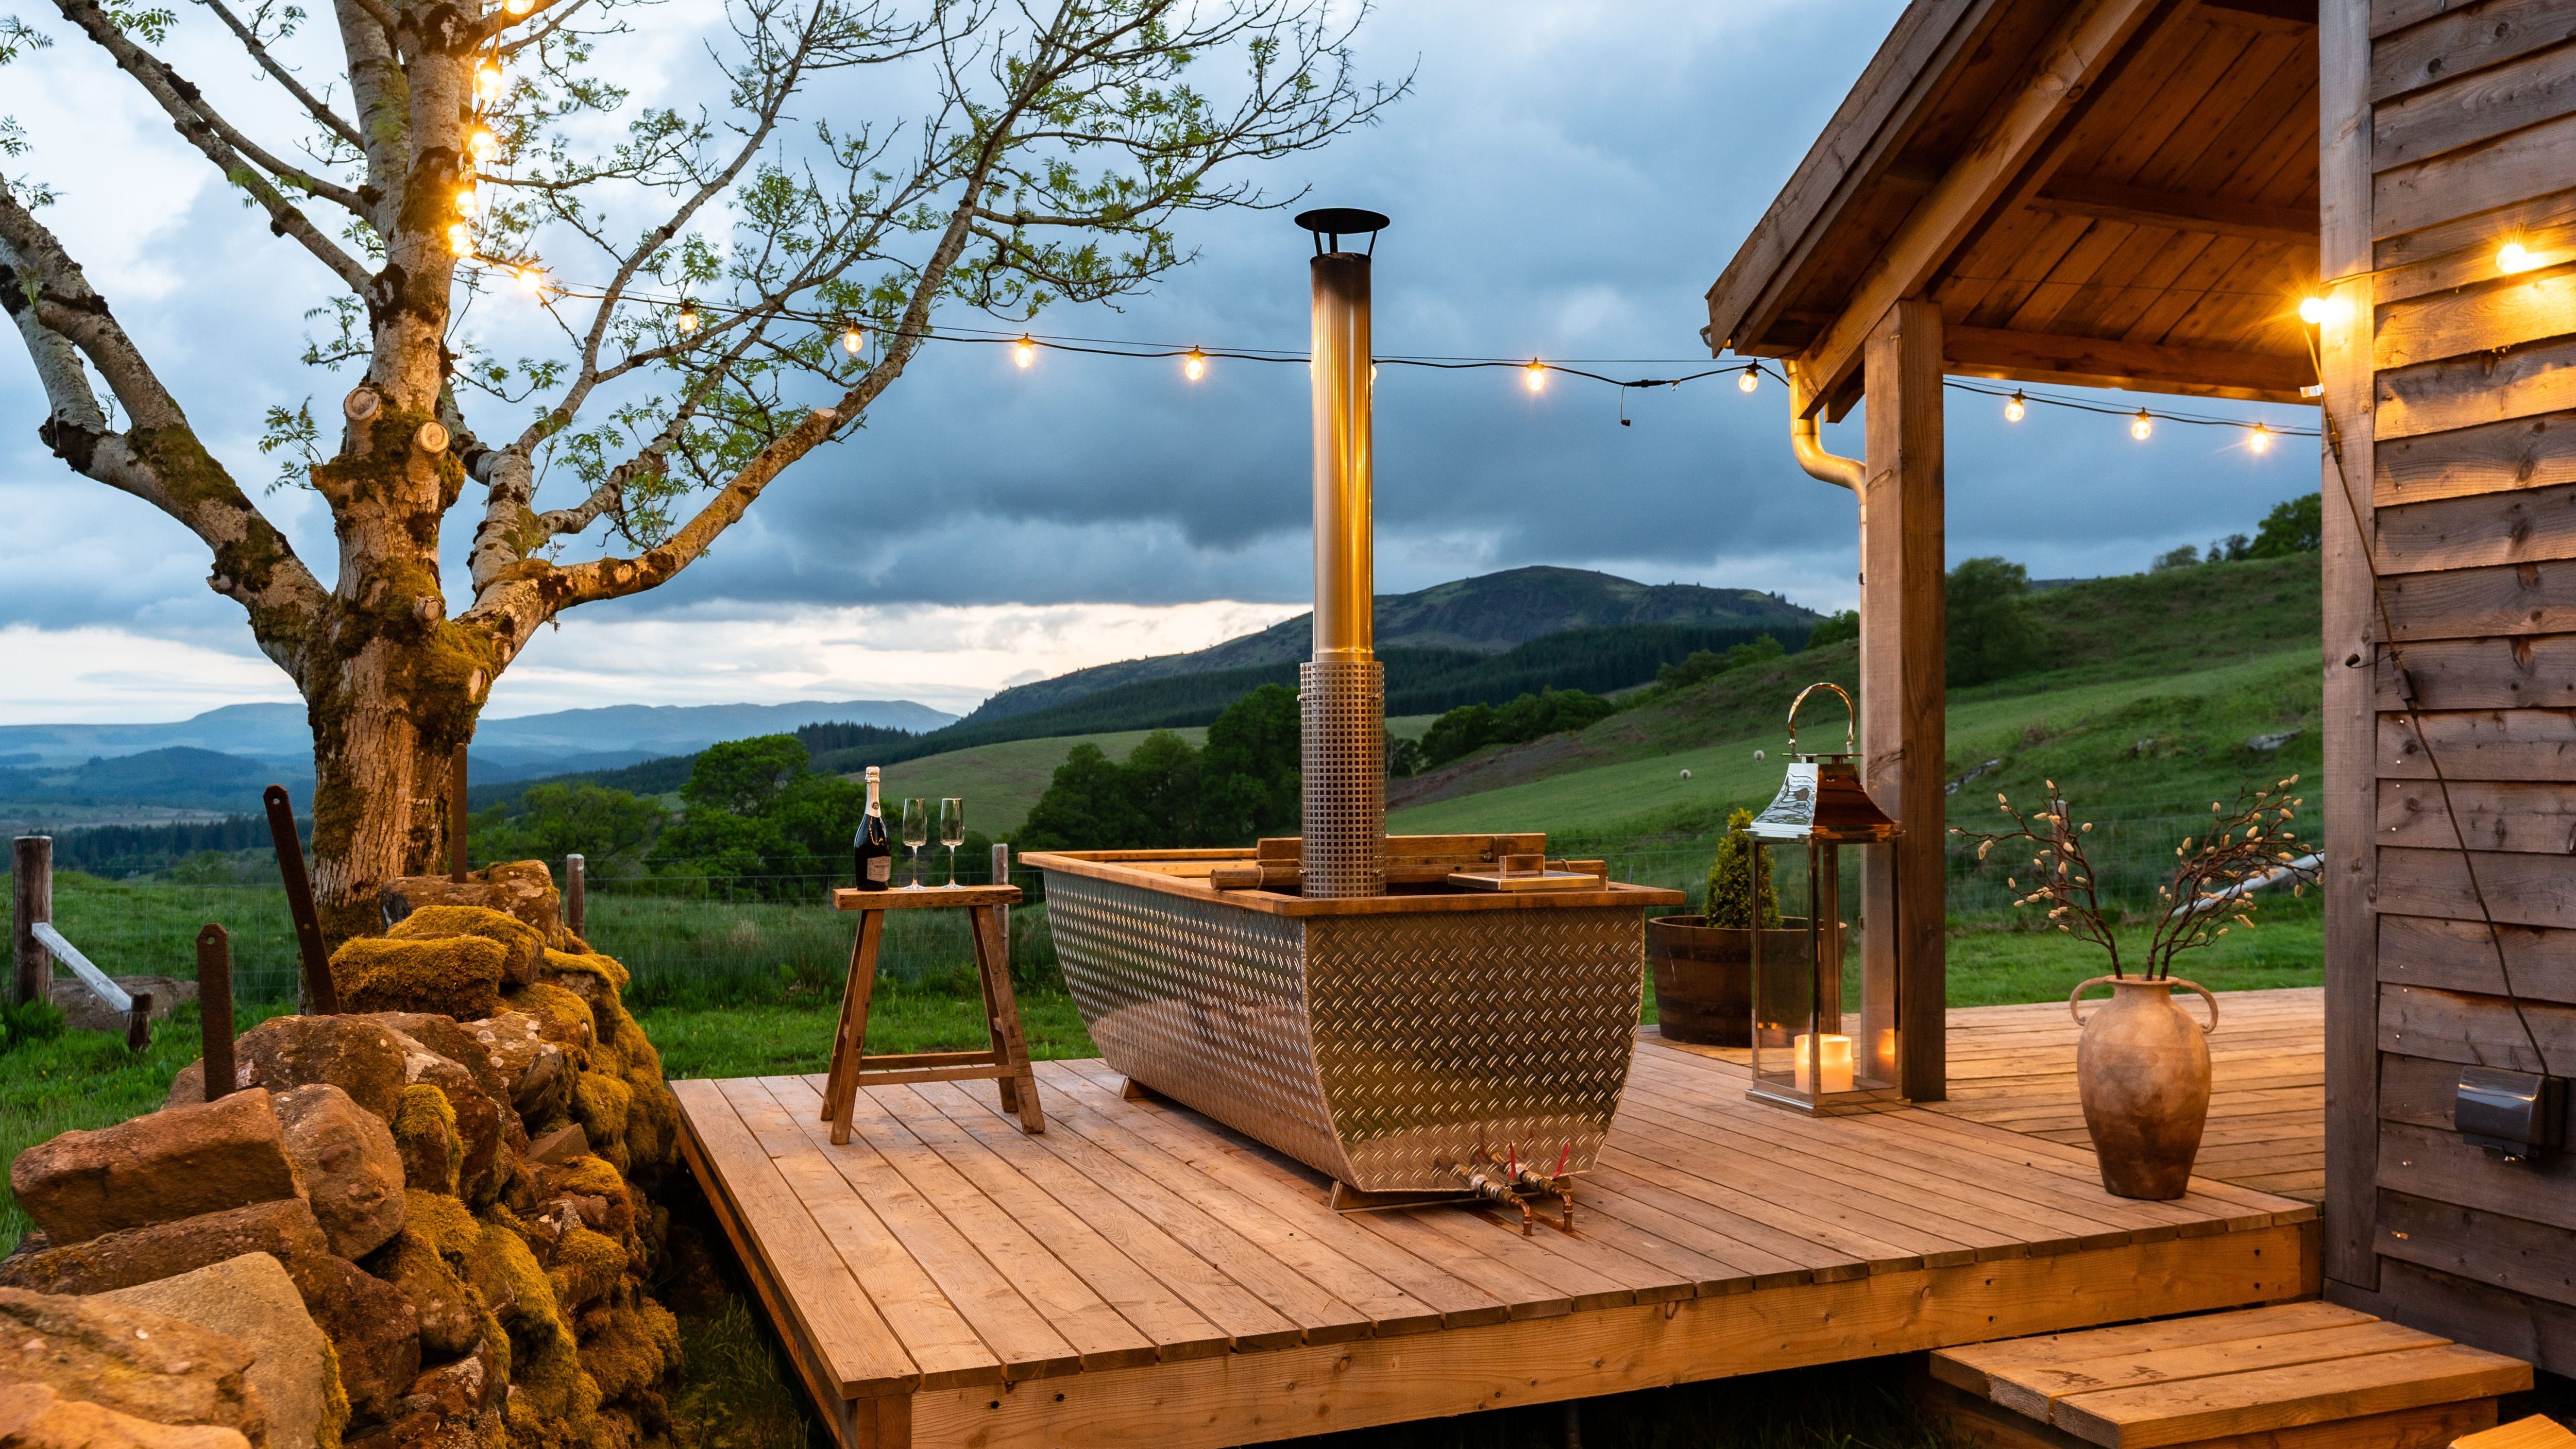 Take in the Fintry hills from the porch of Nether Glenny Bothy